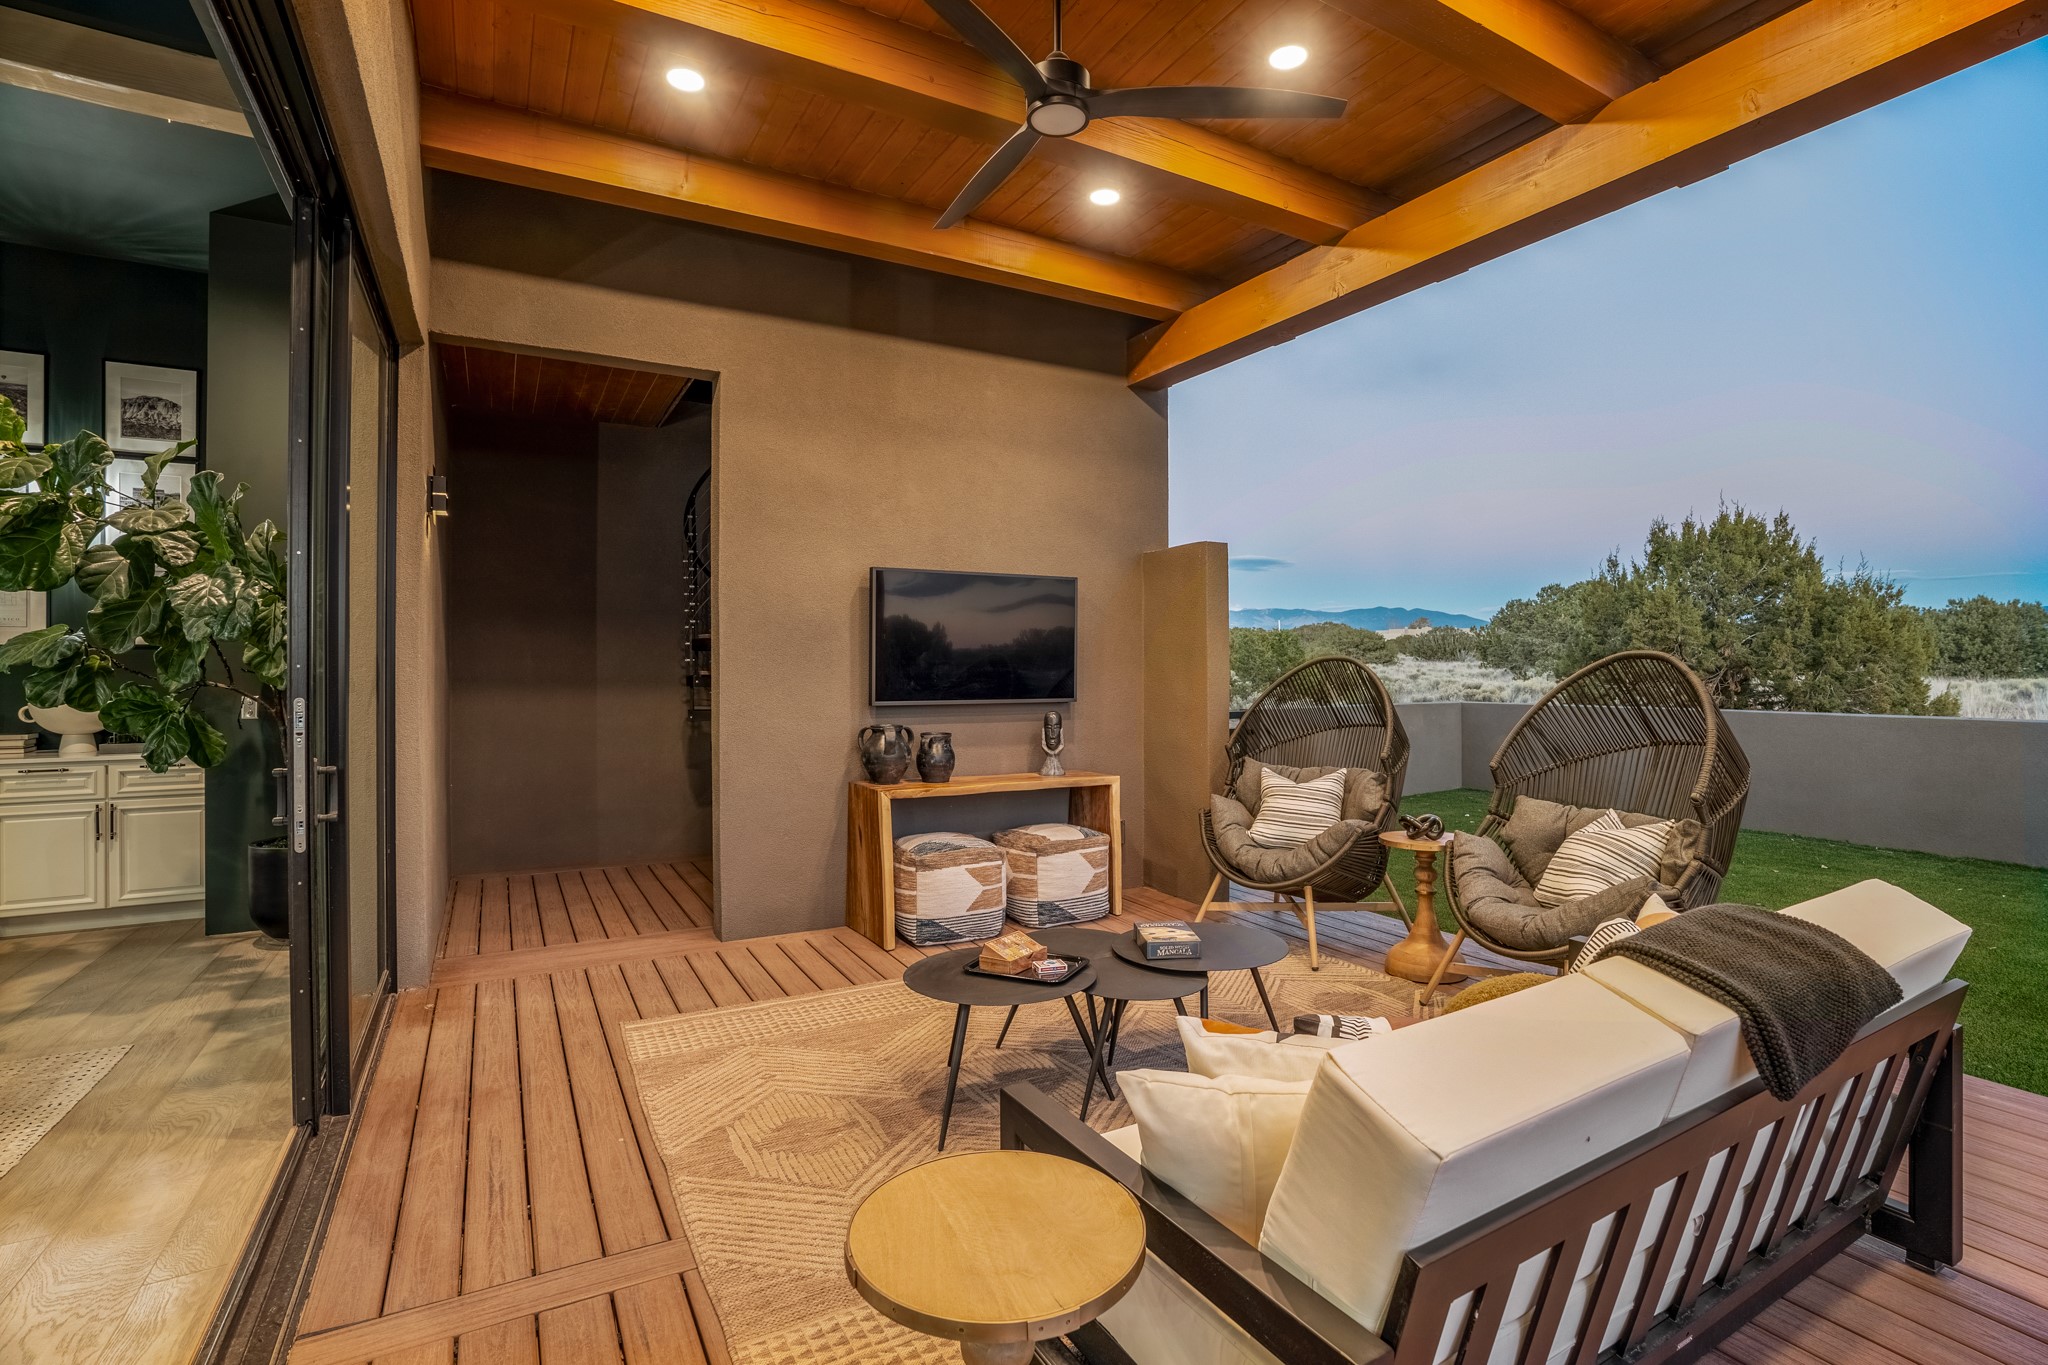 over 1550 sq. ft of outdoor living lounges under deep portals with exposed beams and illuminating views